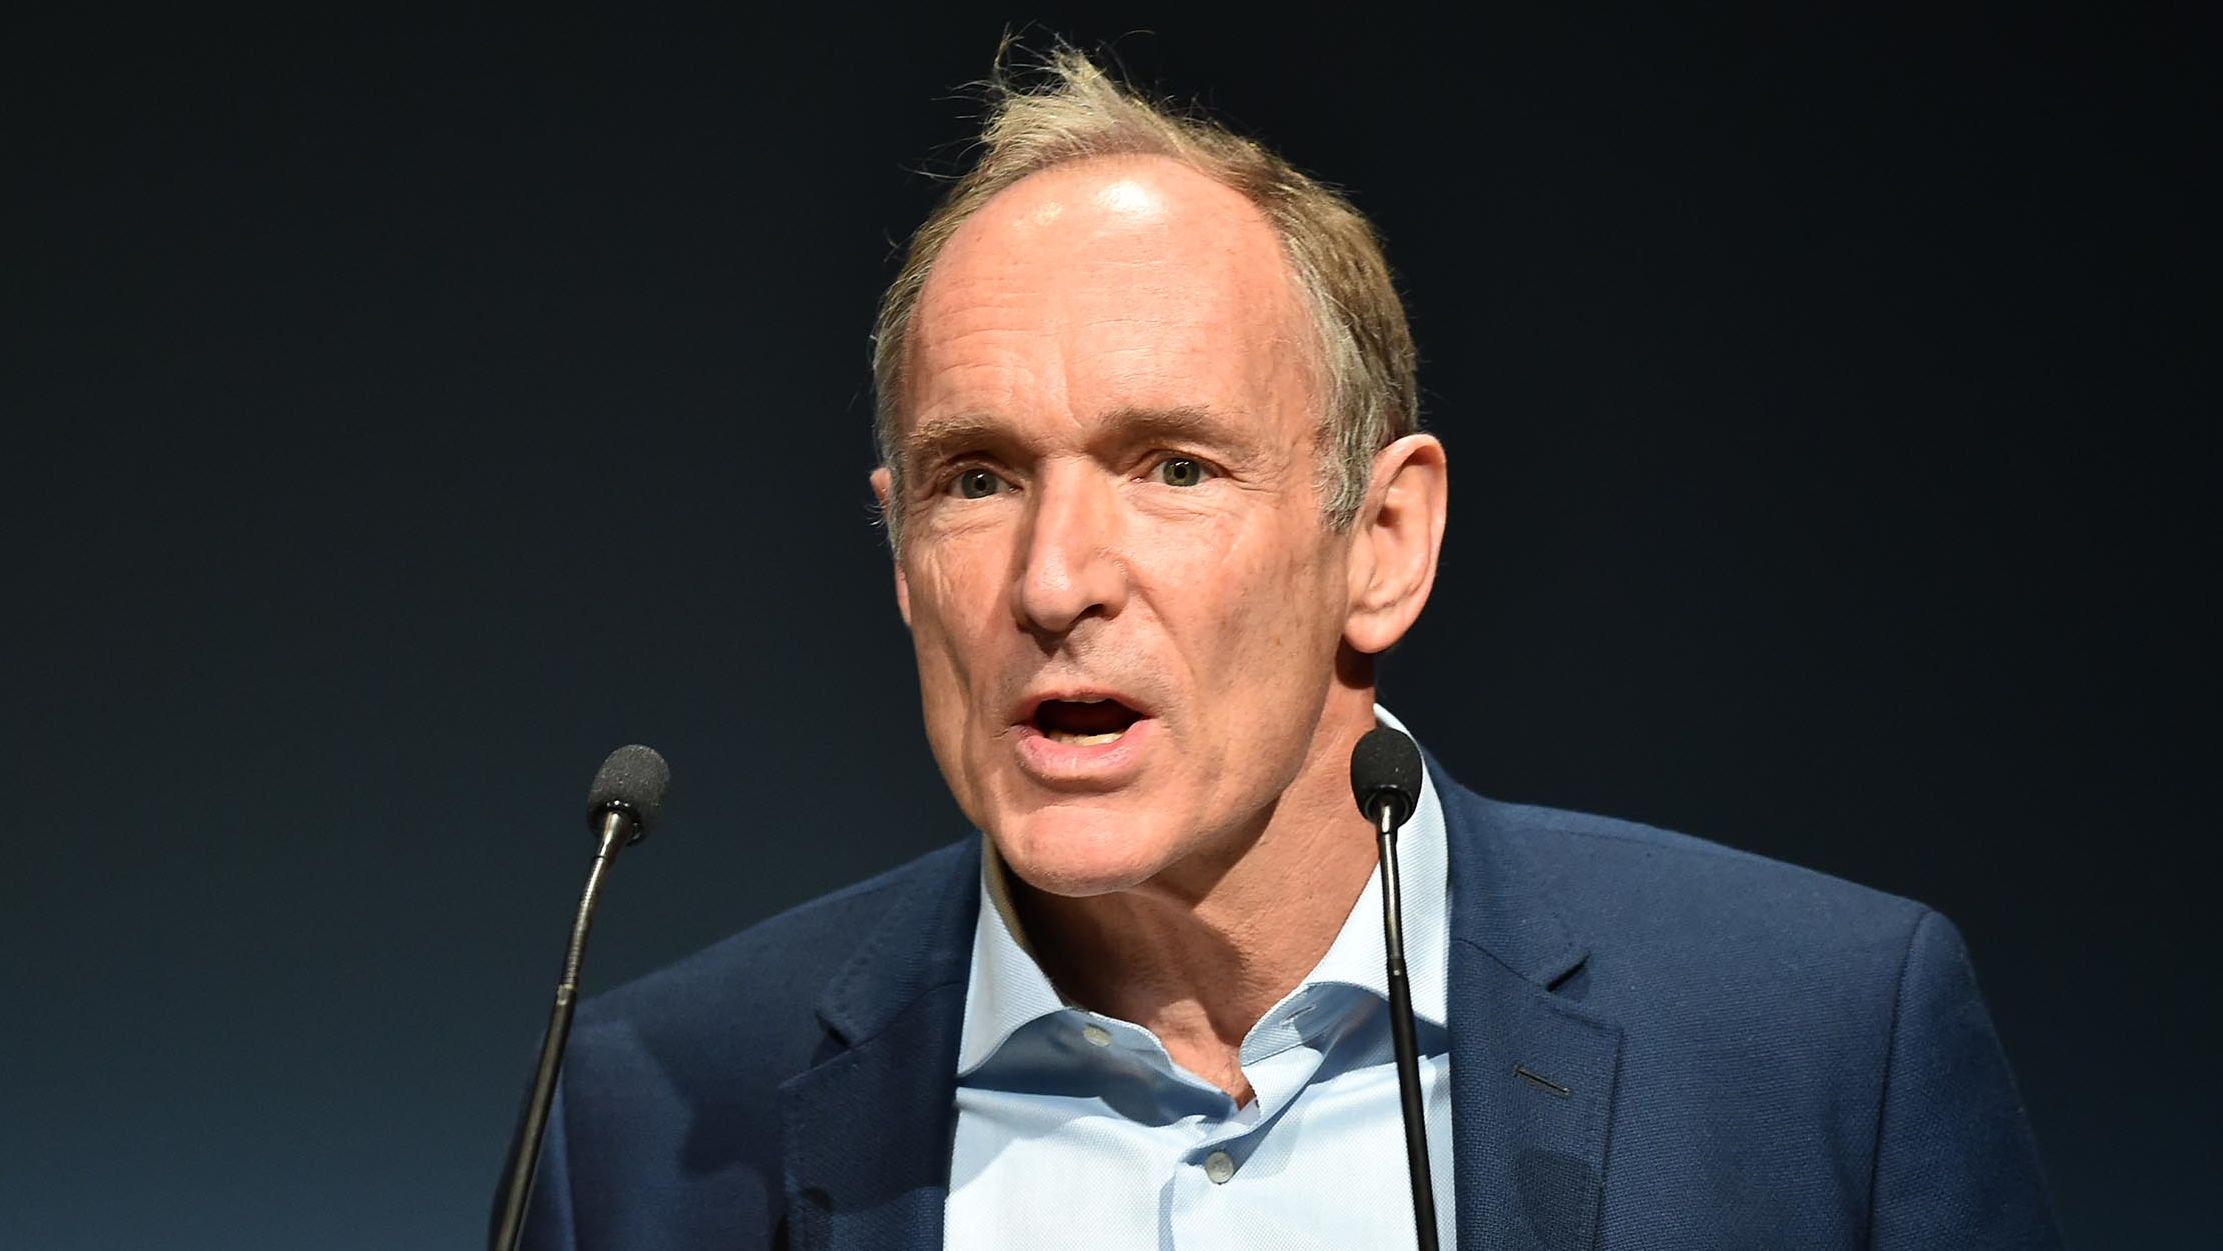 Tim Berners-Lee, inventor of the world wide web, has said the abuse directed towards women "should concern us all."